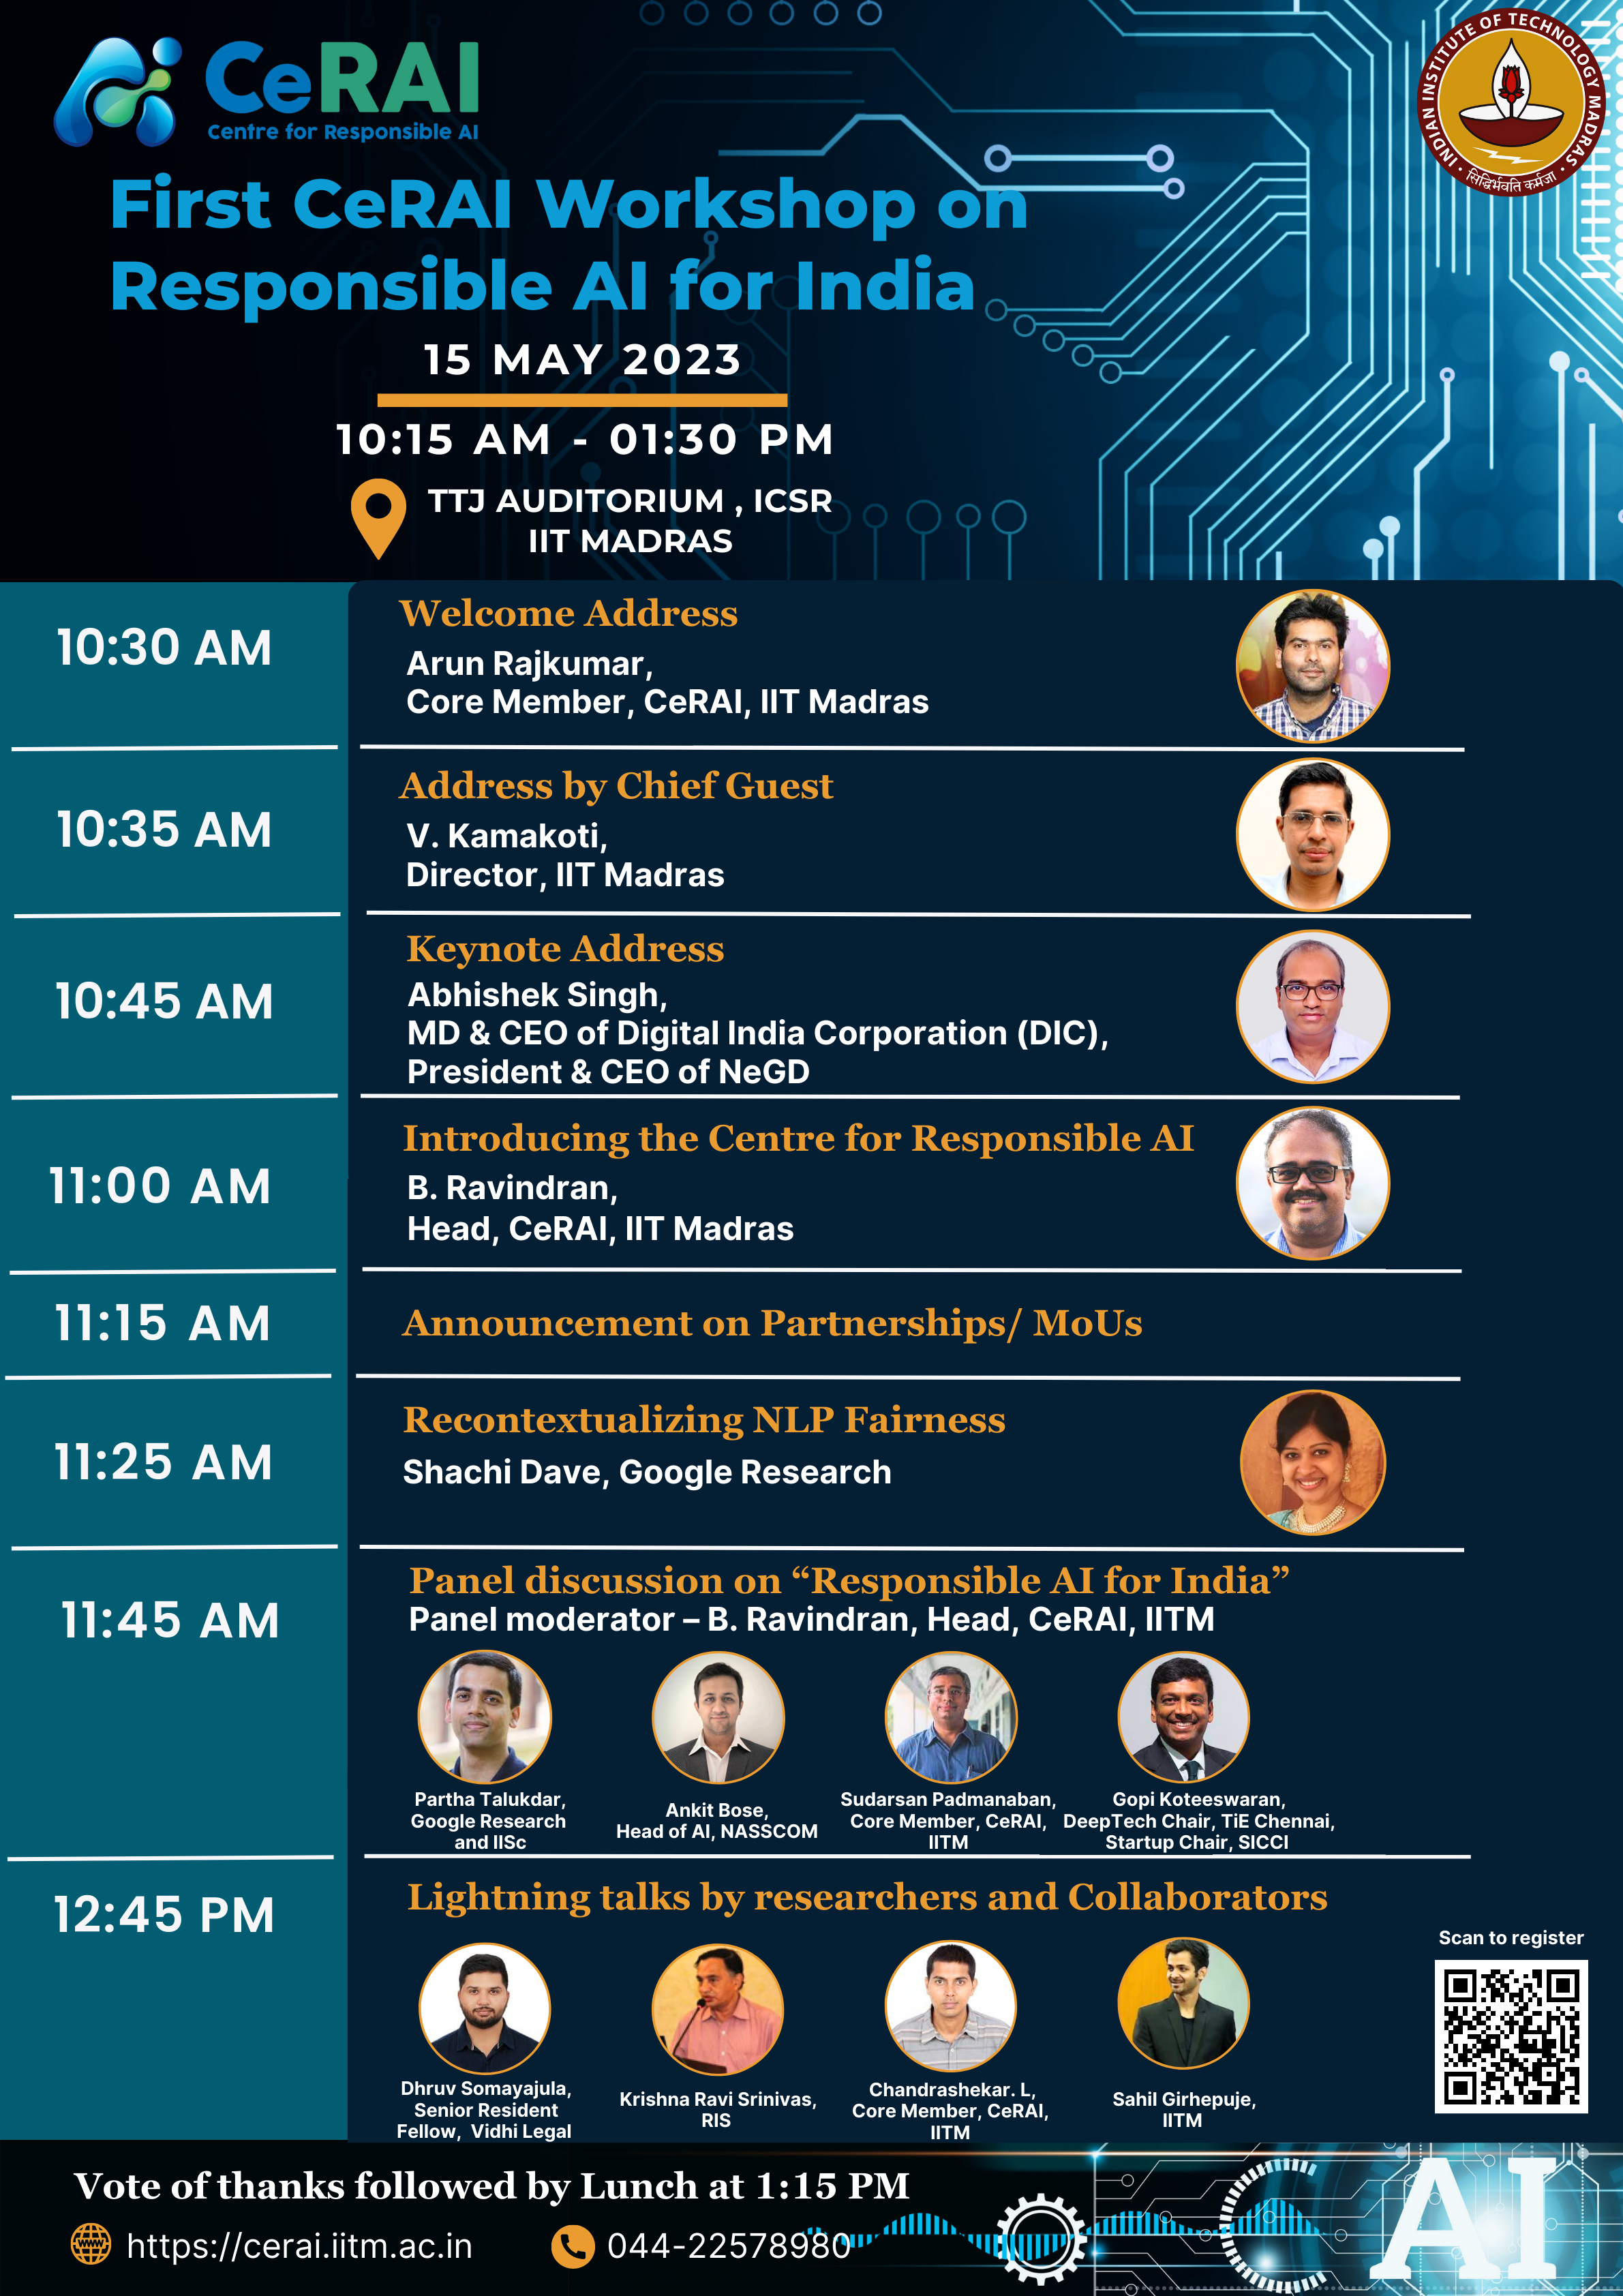 First CeRAI Workshop on Responsible AI for India